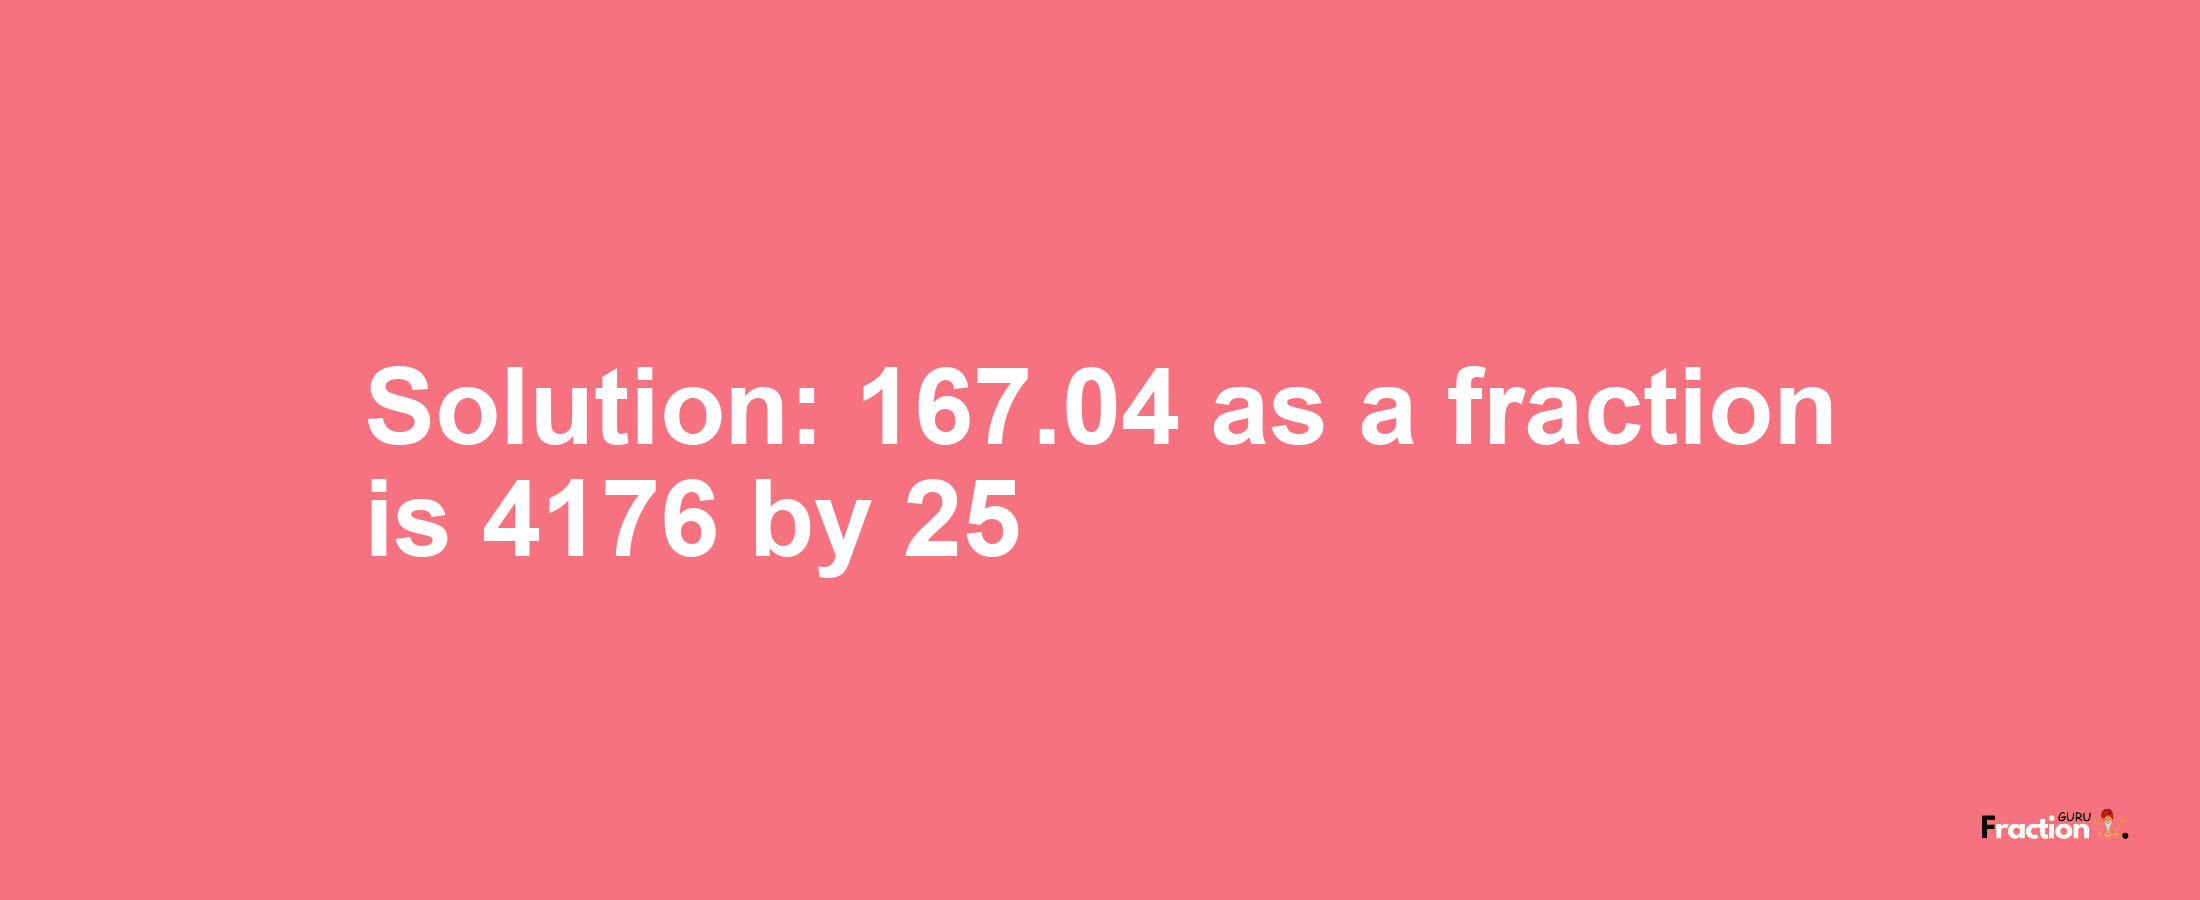 Solution:167.04 as a fraction is 4176/25